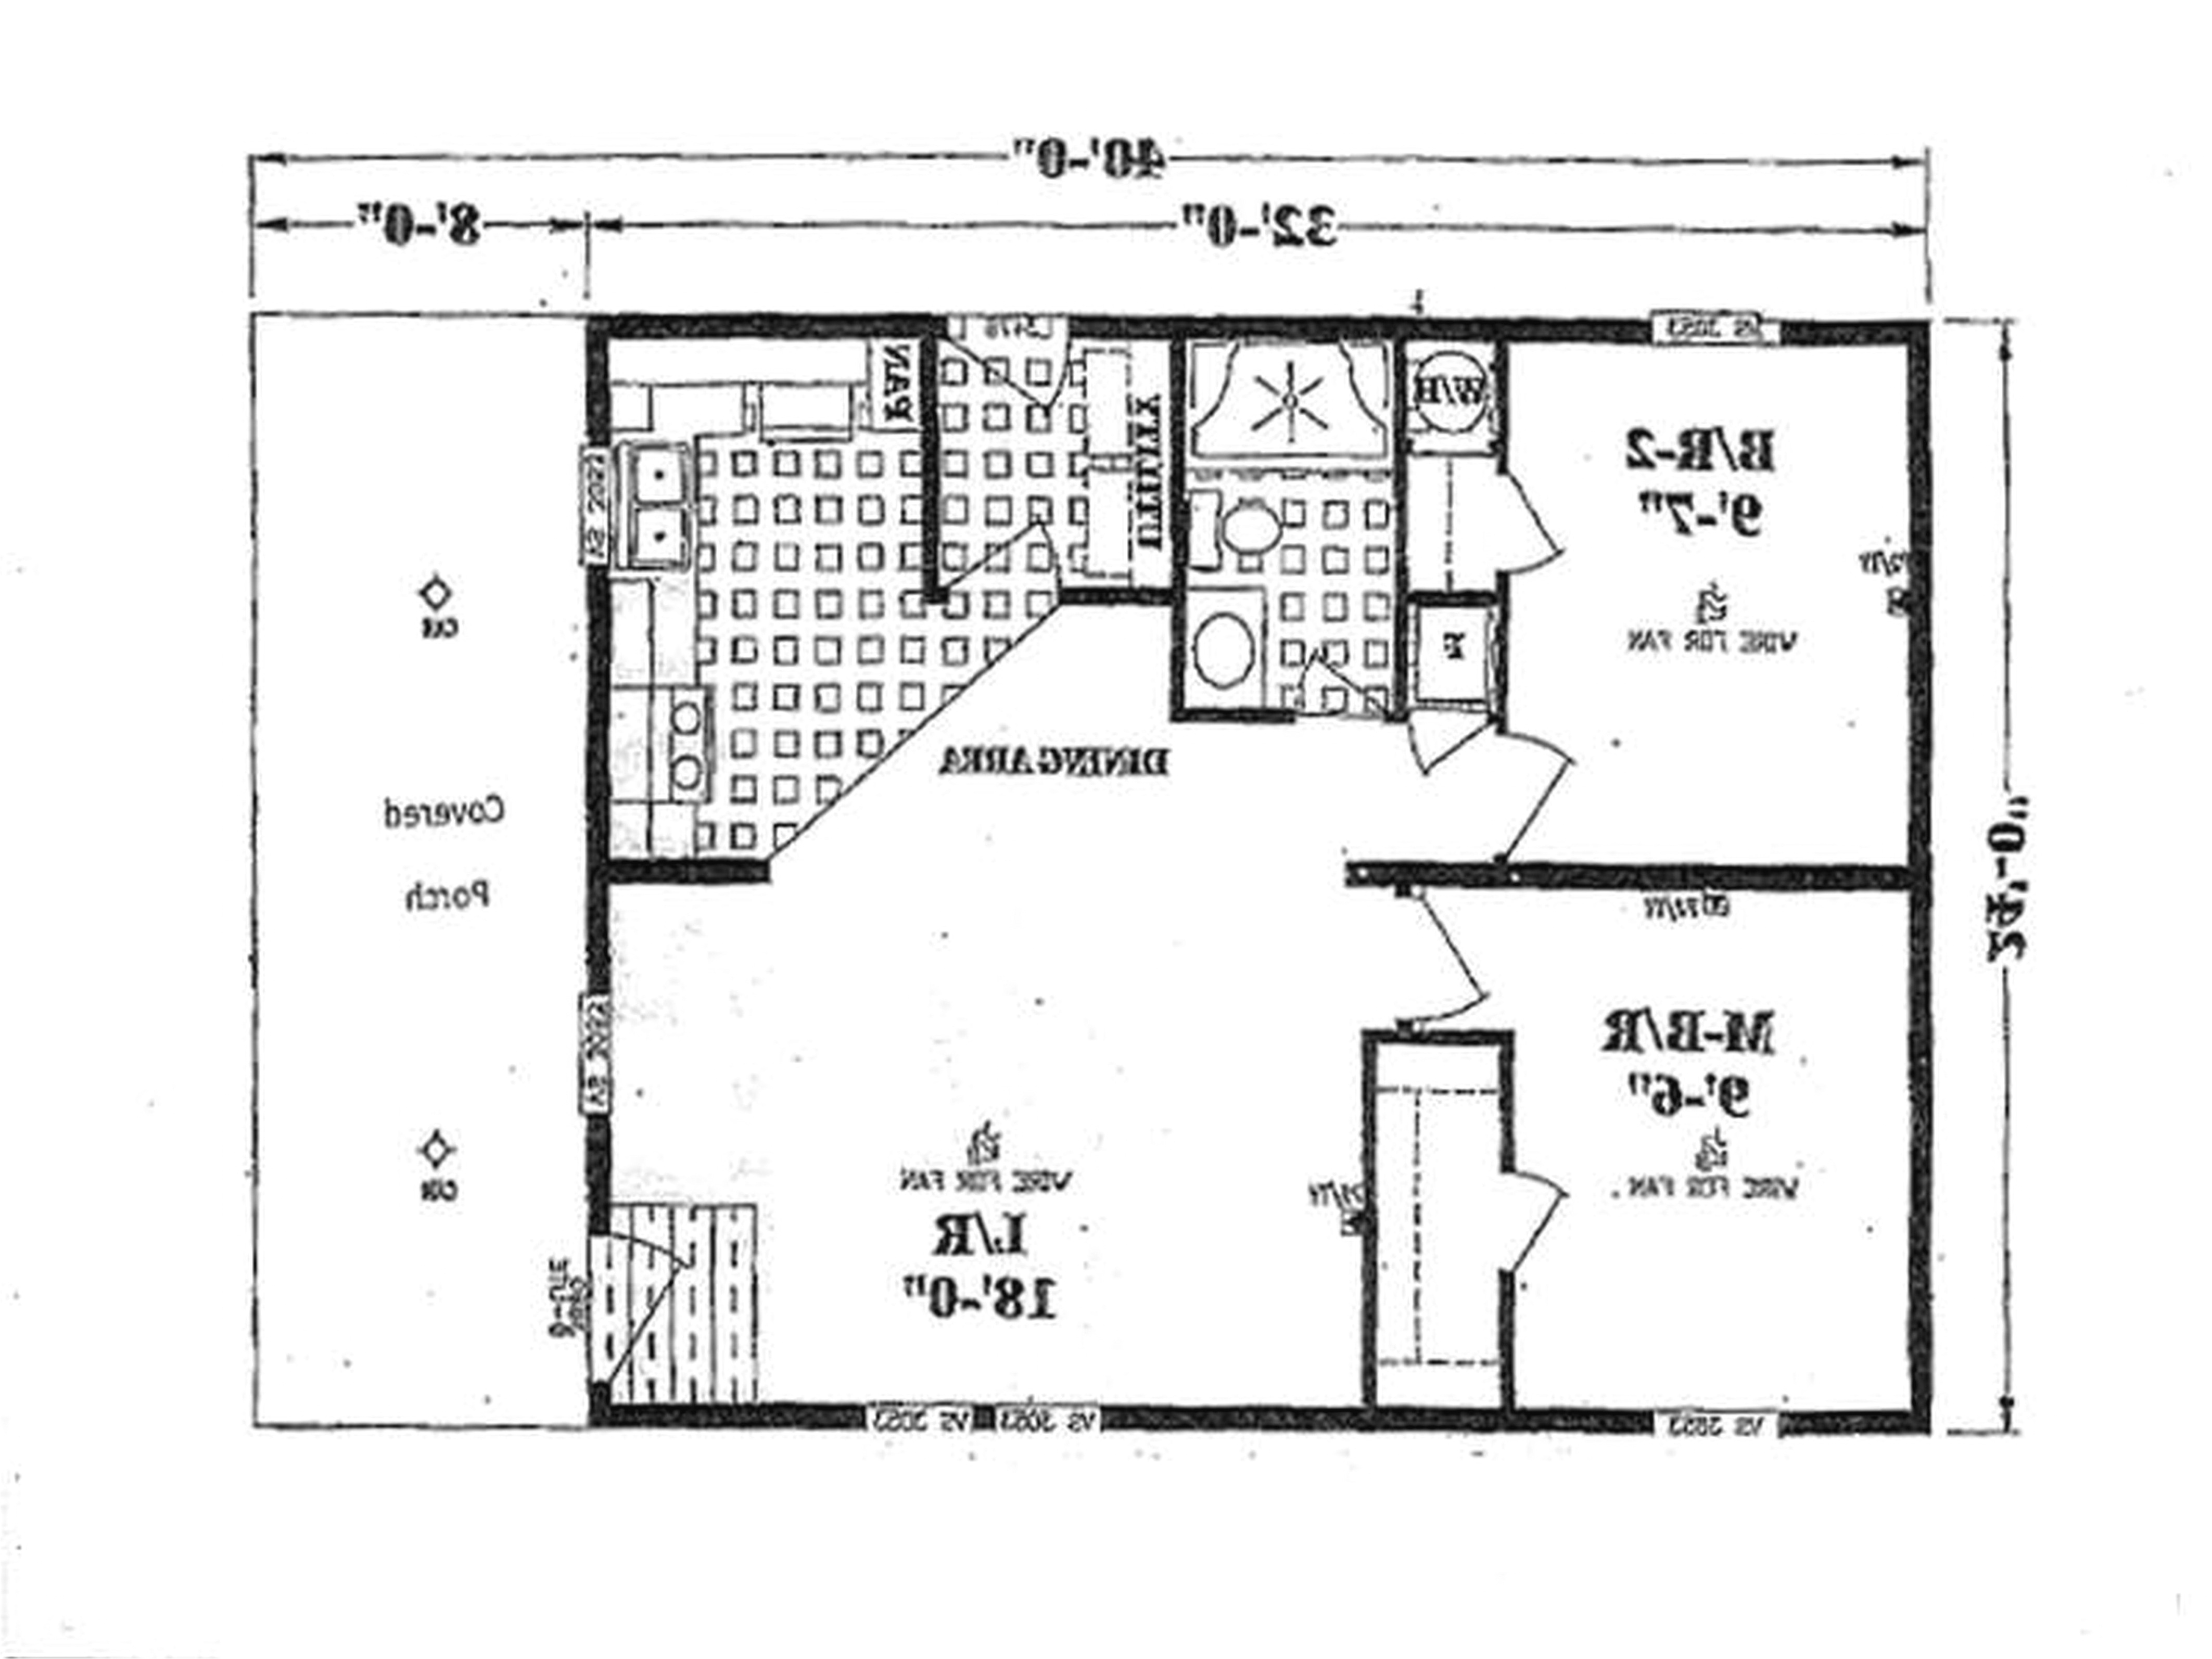 1000 square foot home small house floor plans under 1000 square feet new small house plans